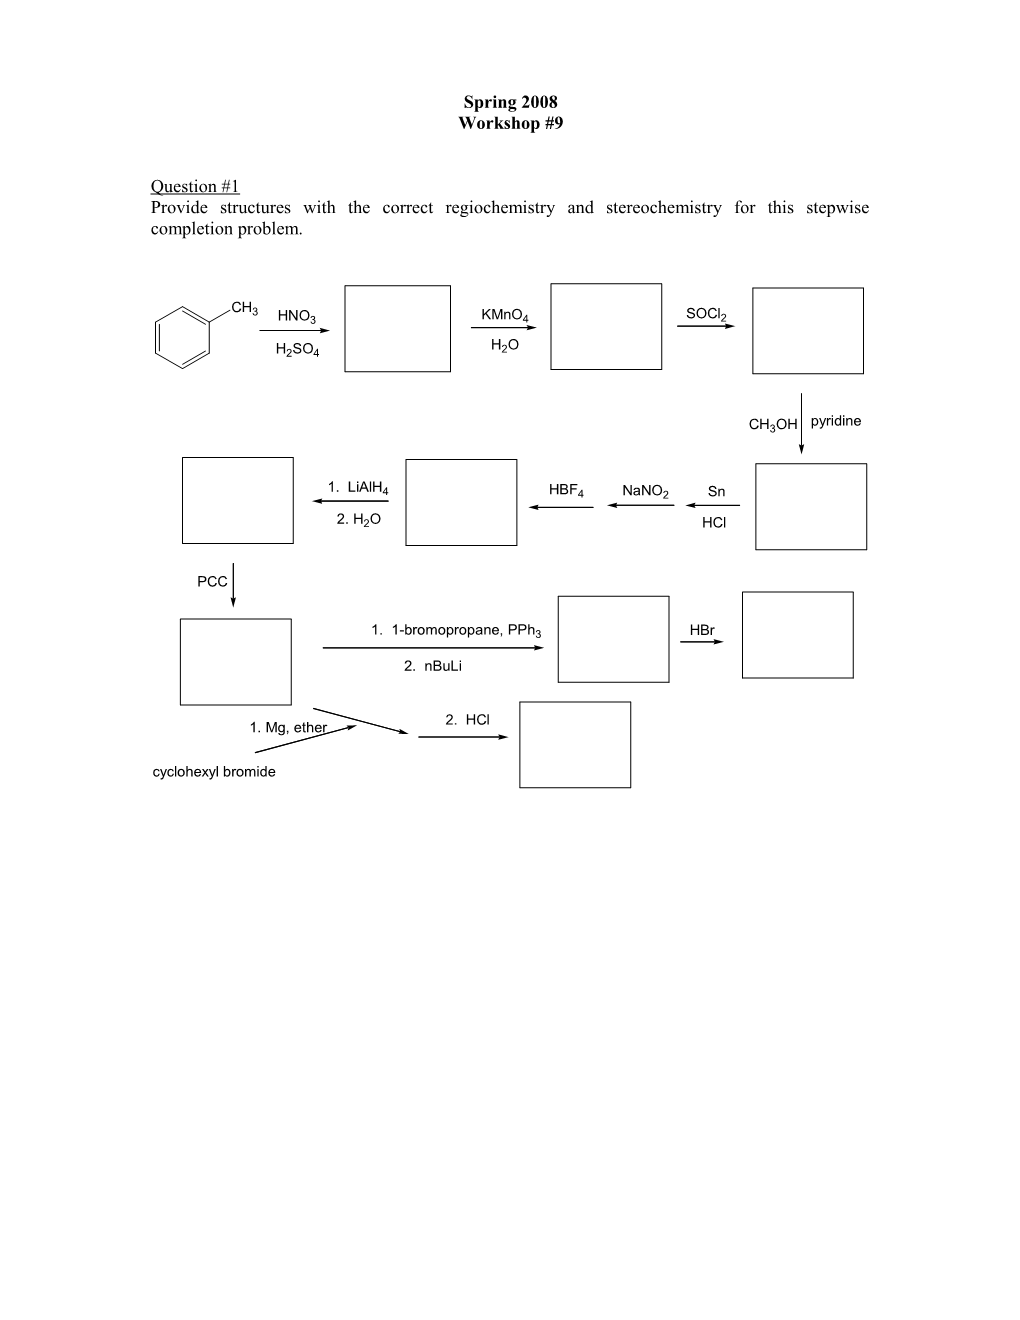 Provide Structures with the Correct Regiochemistry and Stereochemistry for This Stepwise